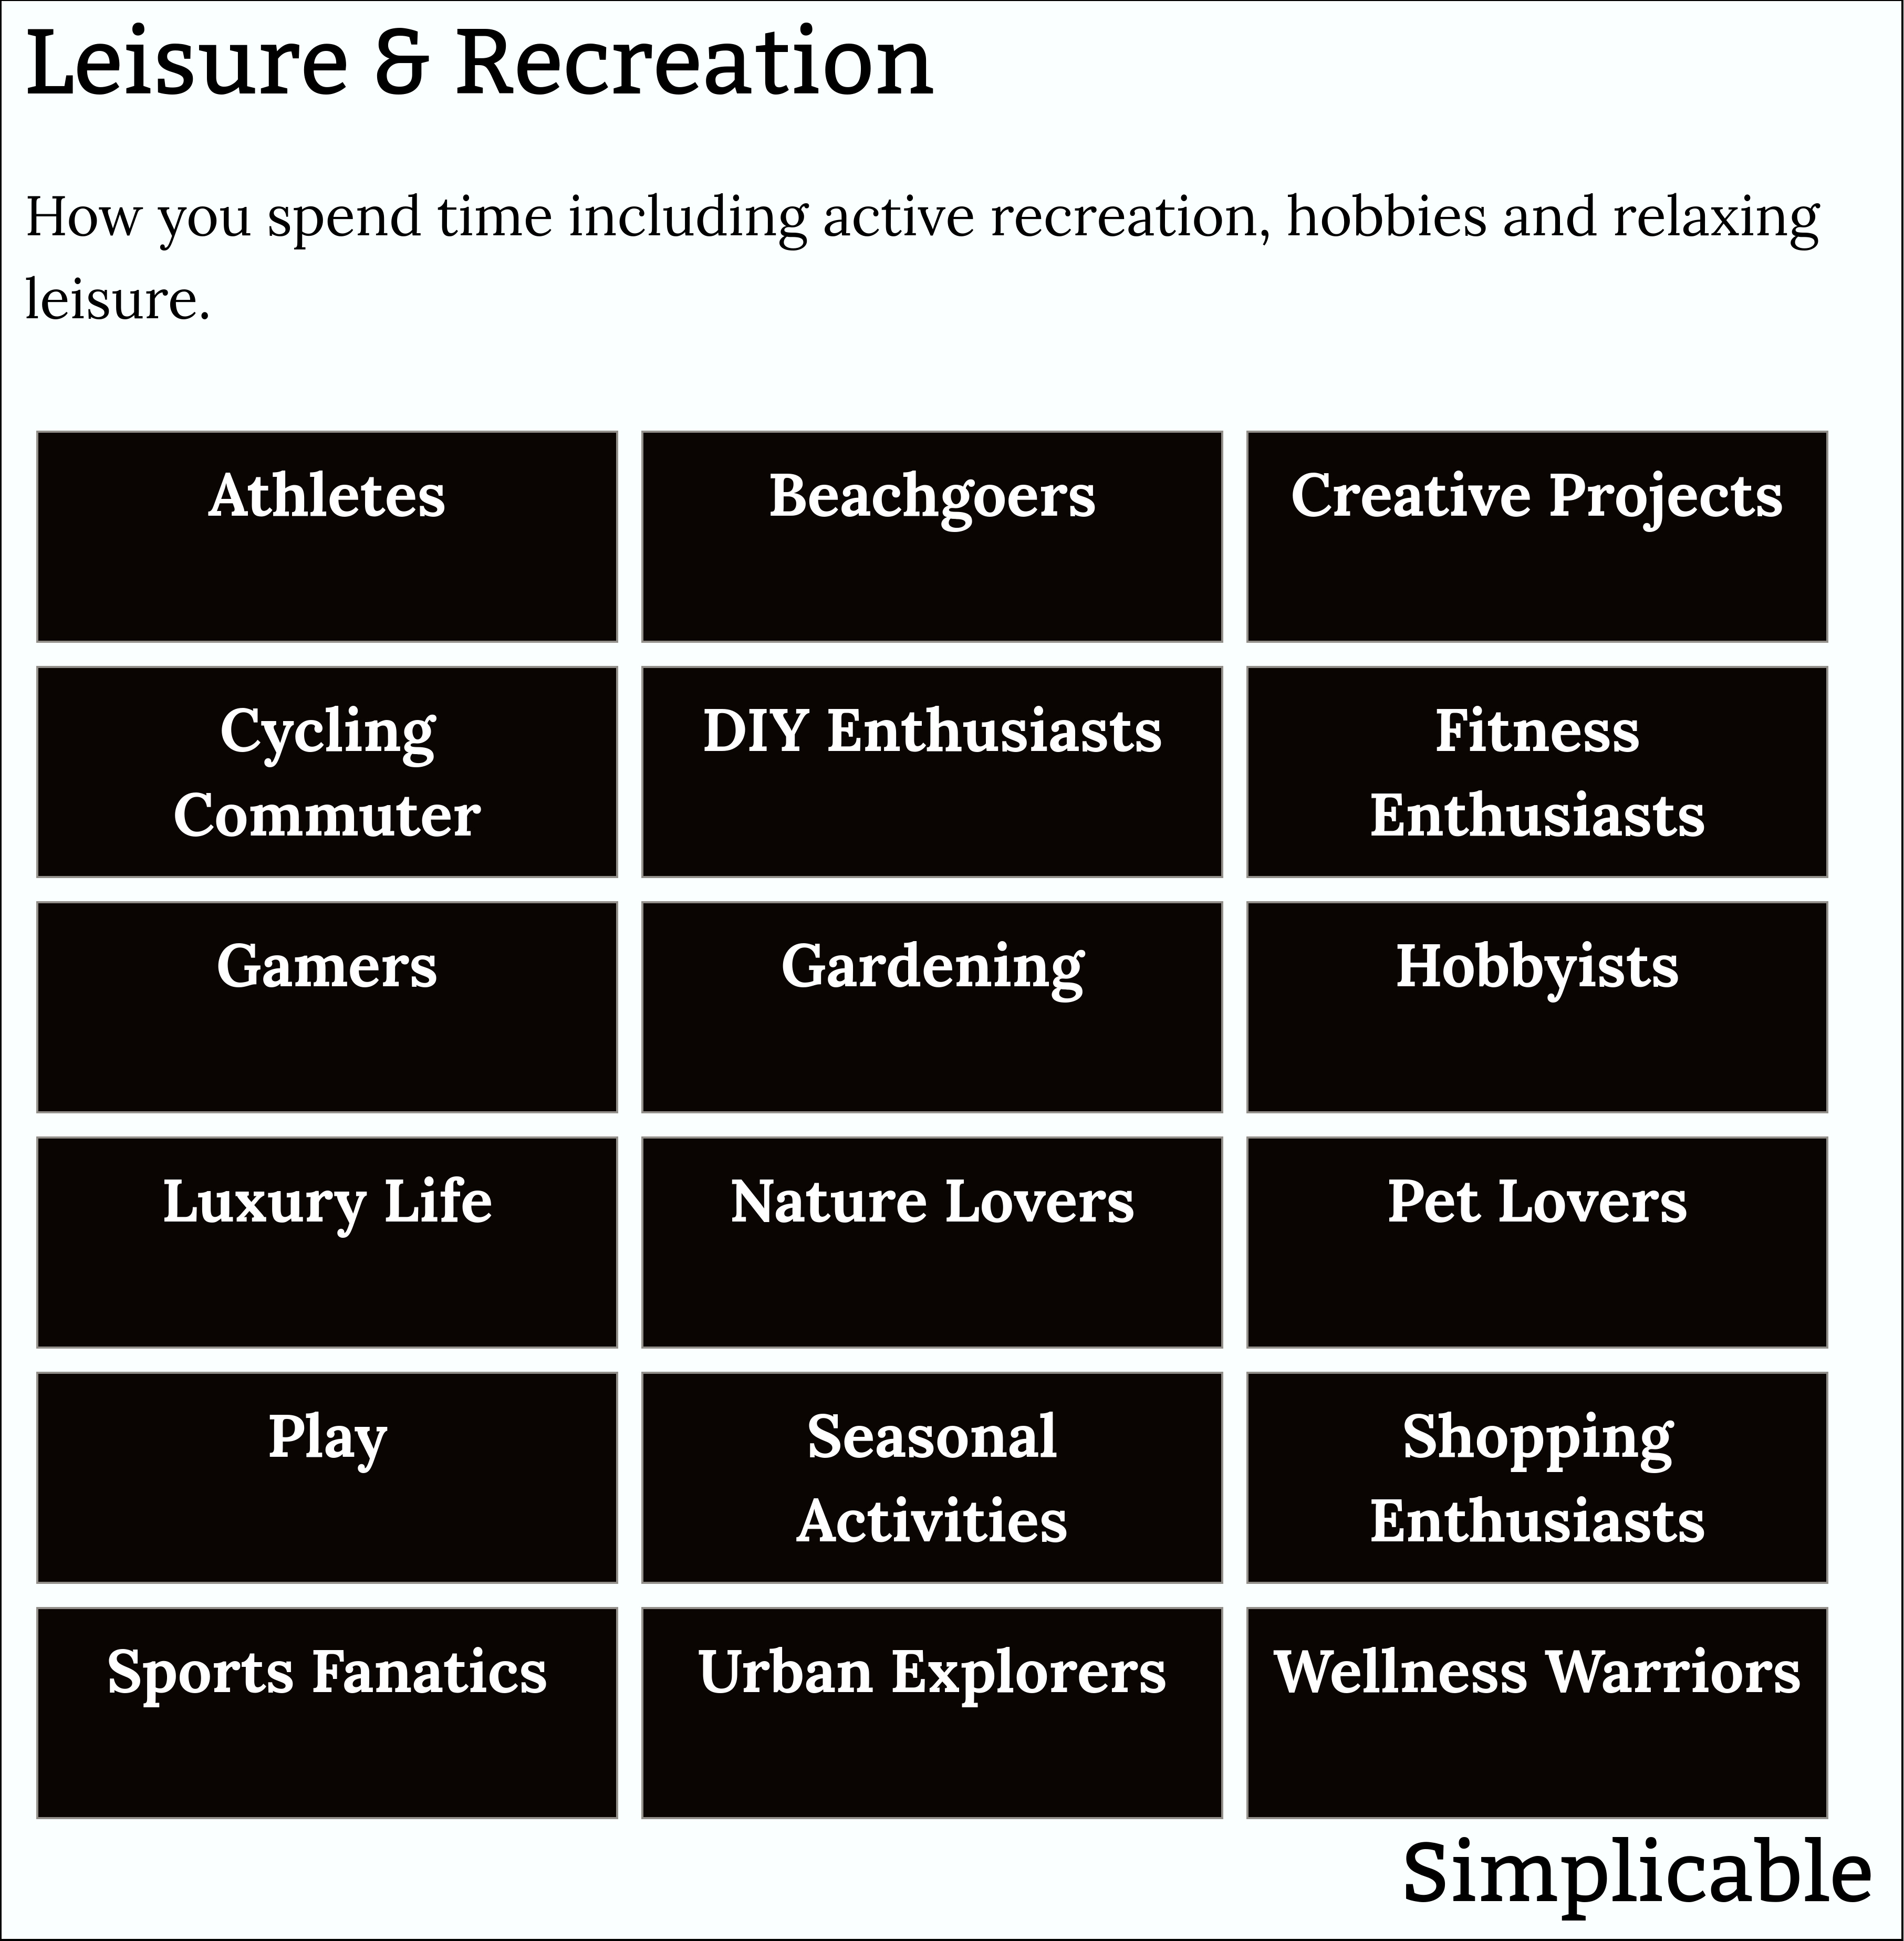 lifestyles related to leisure and recreation